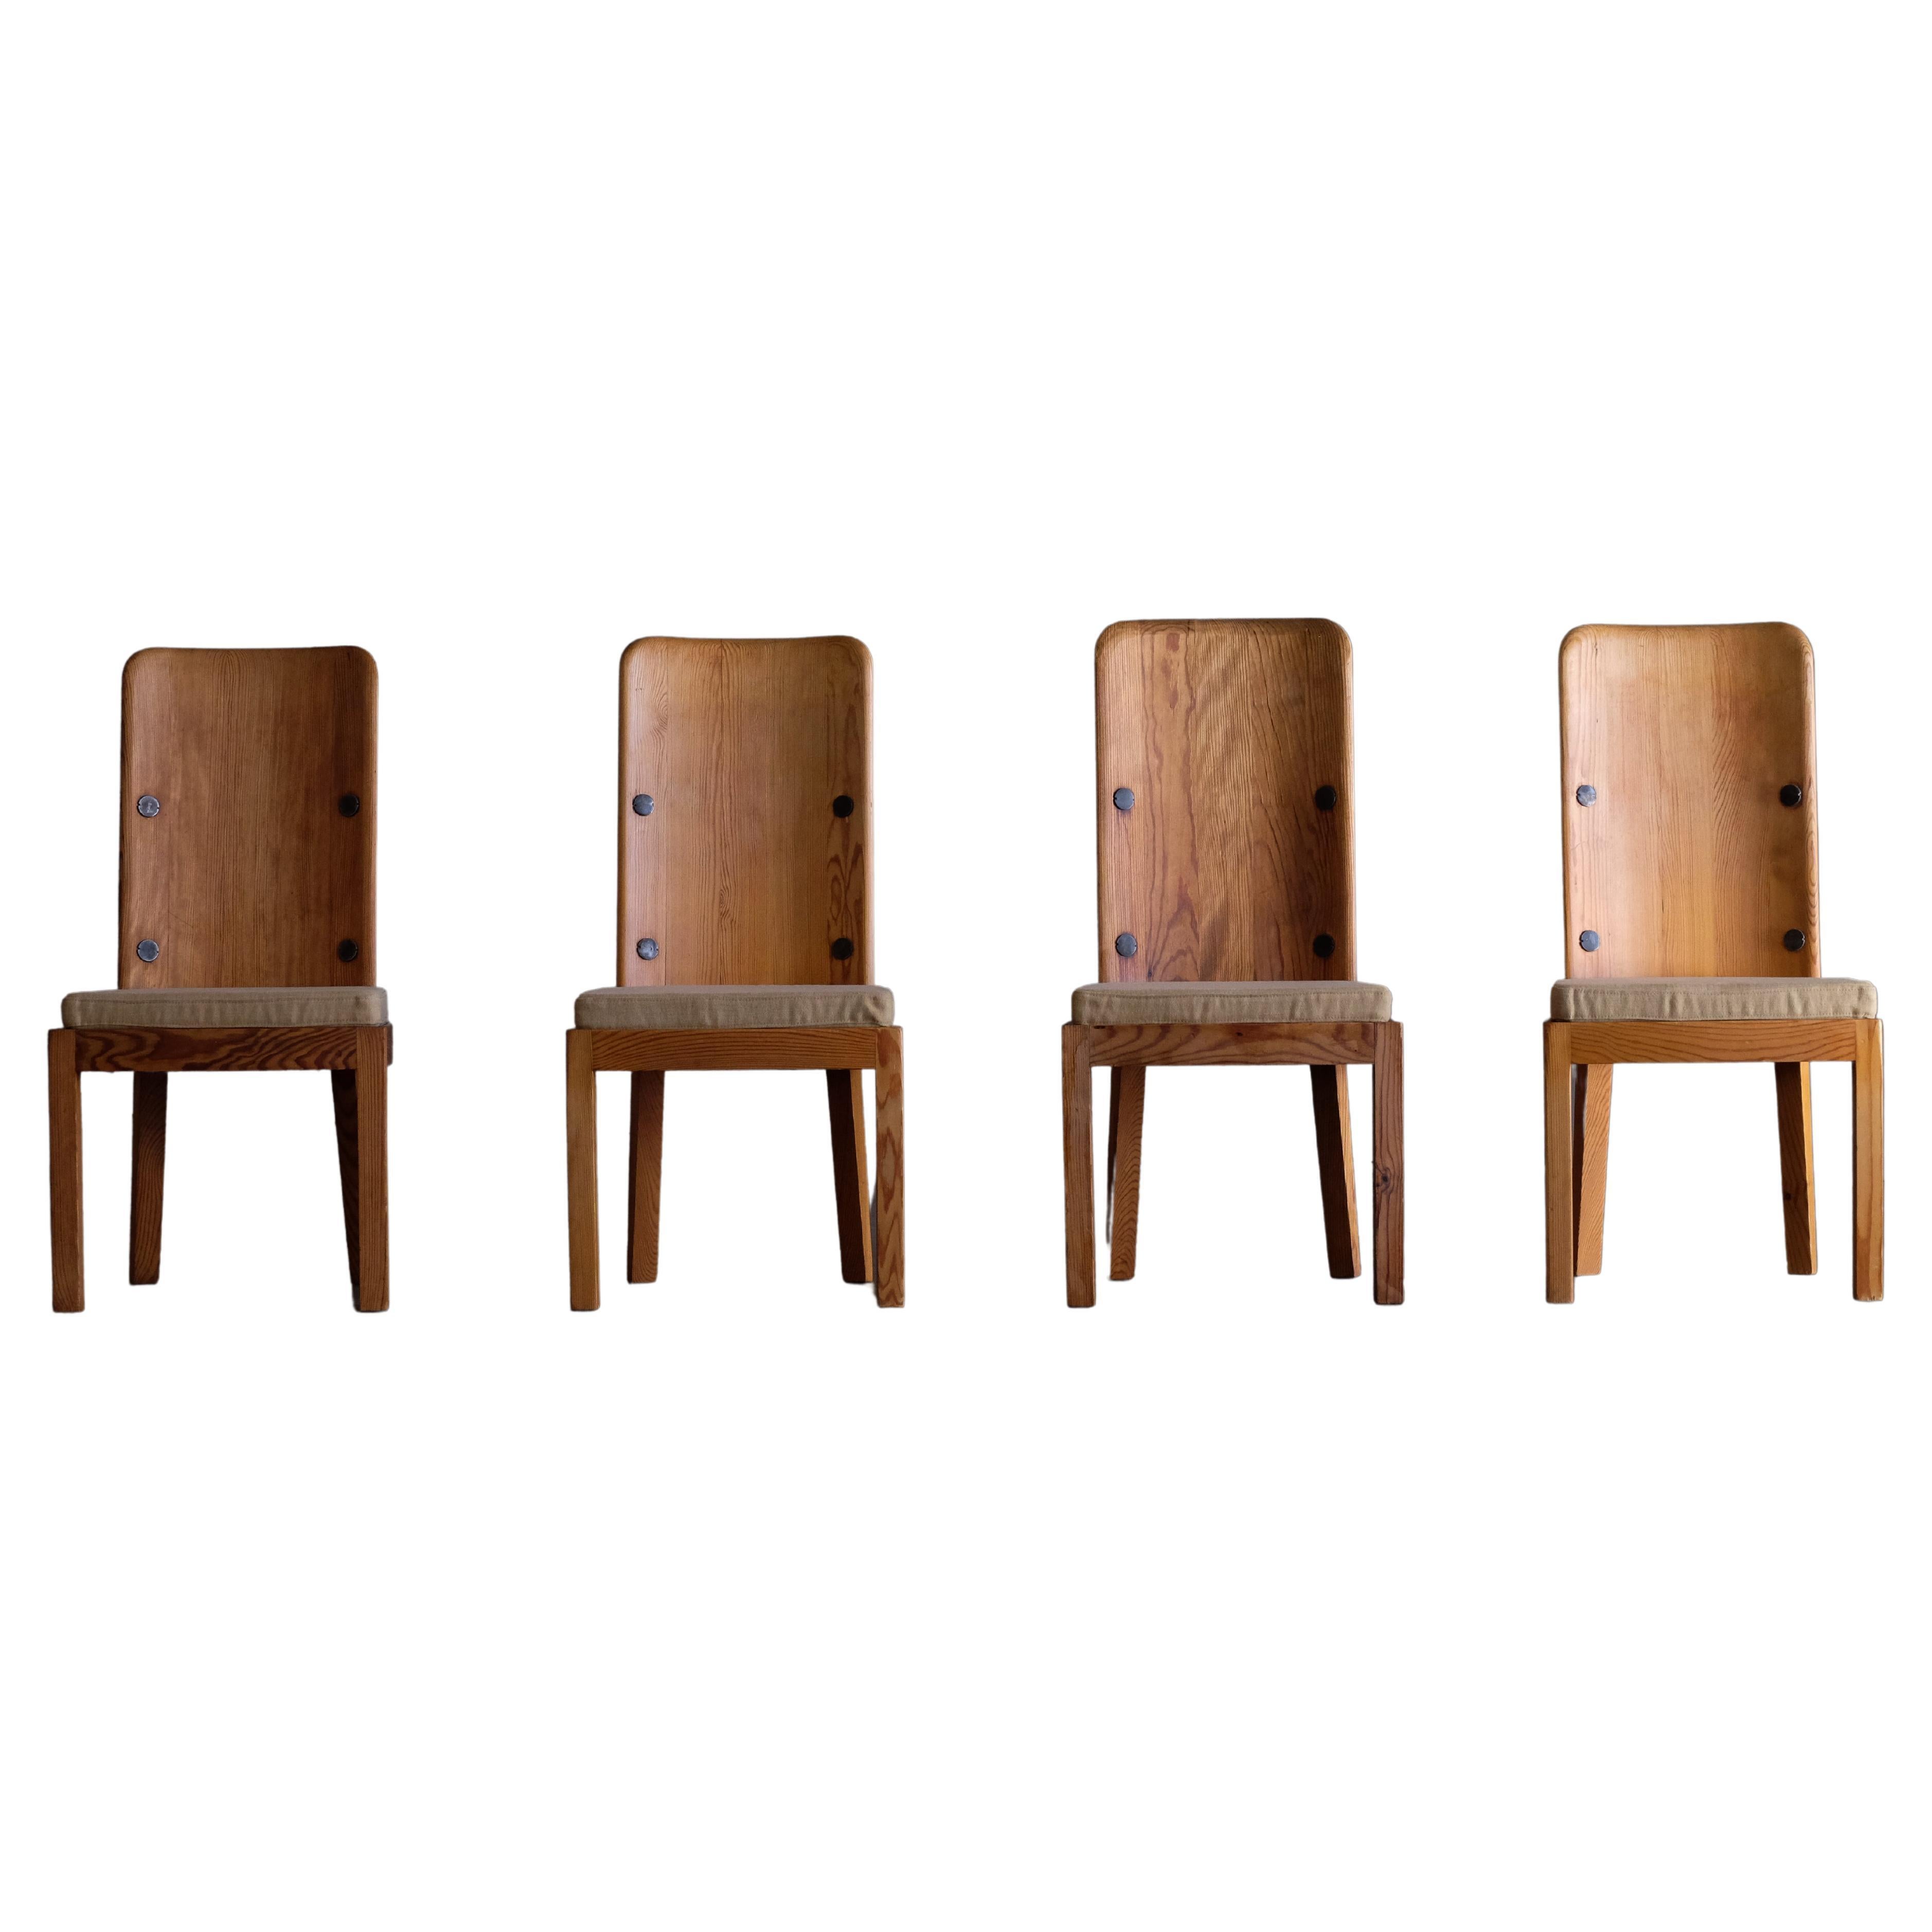 Set of 4 "Lovö" Chairs by Axel Einar-Hjorth, 1930s